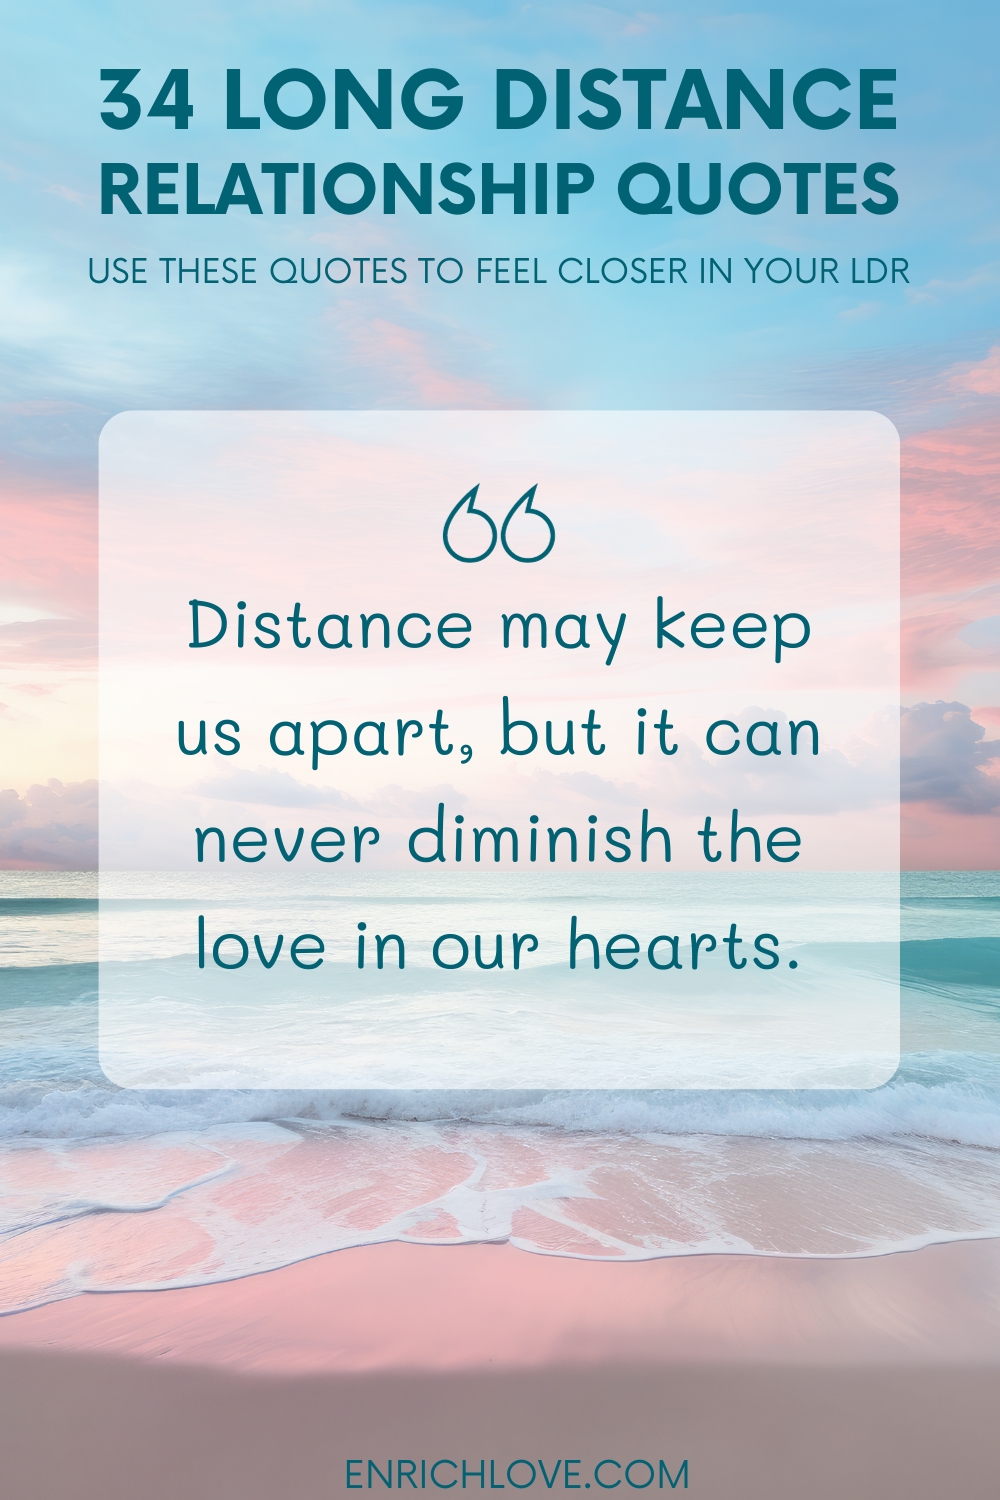 34 Long Distance Relationship Quotes - Distance may keep us apart, but it can never diminish the love in our hearts.